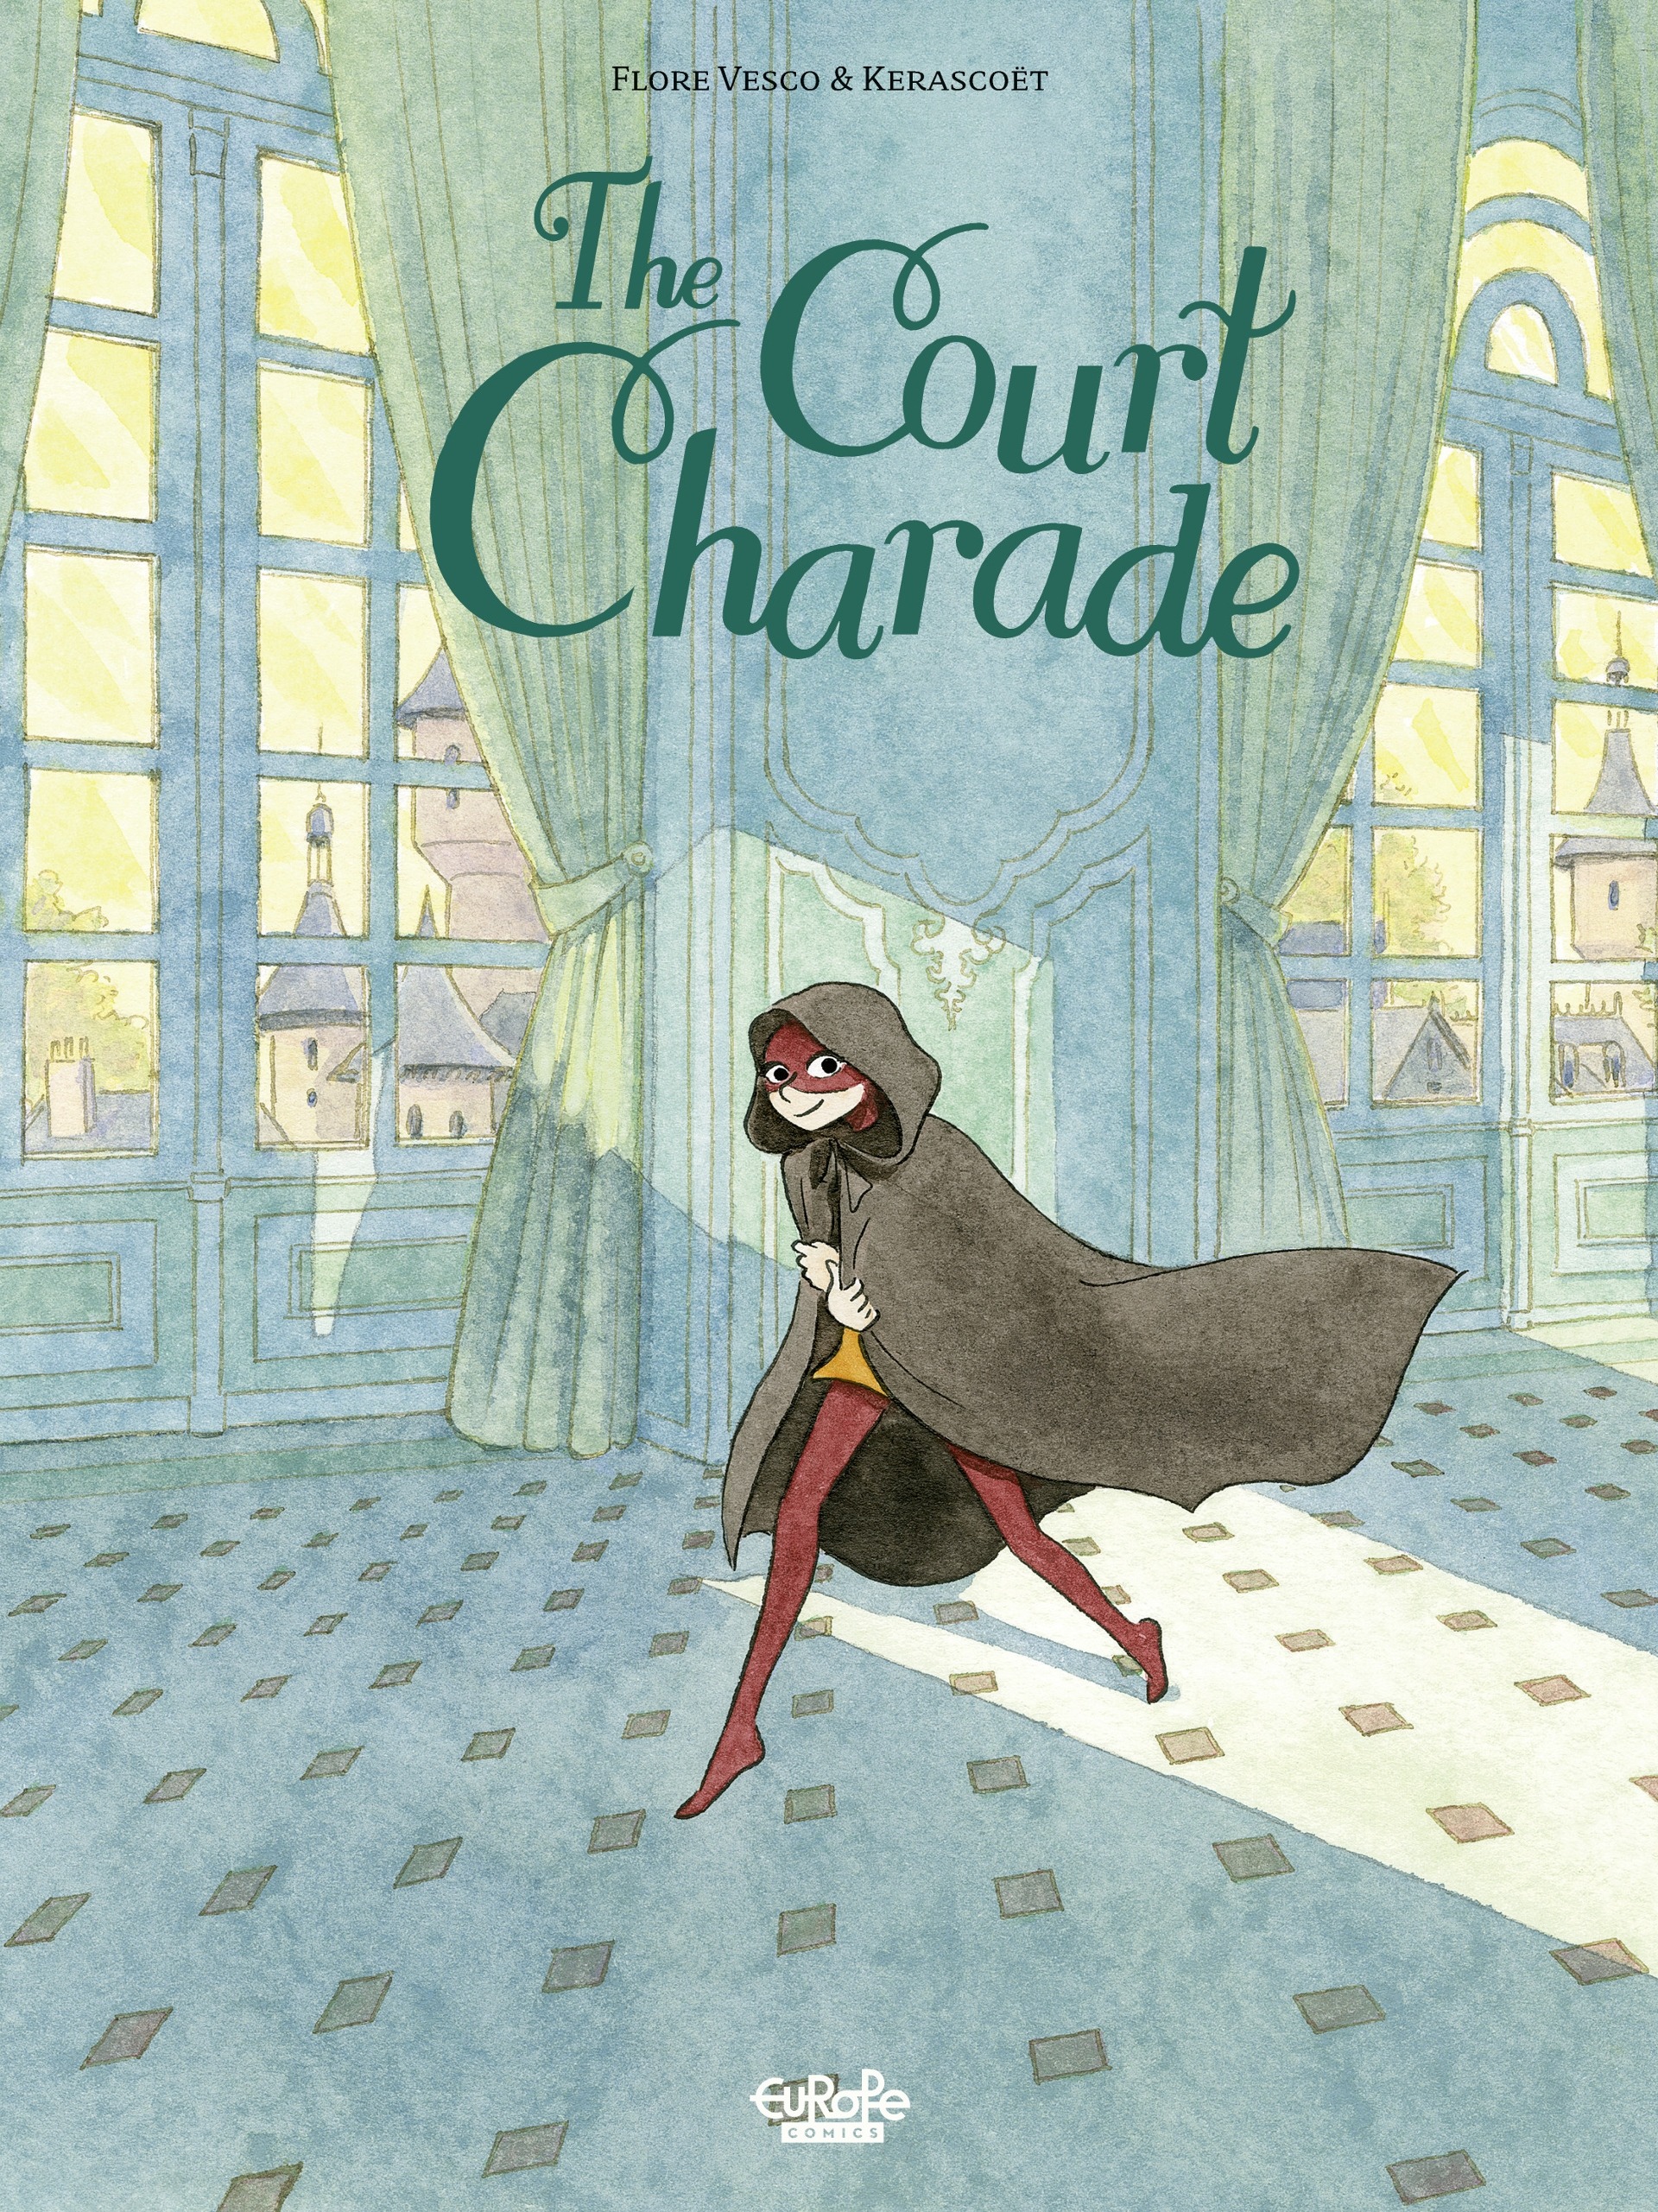 Read online The Court Charade comic -  Issue # TPB - 1